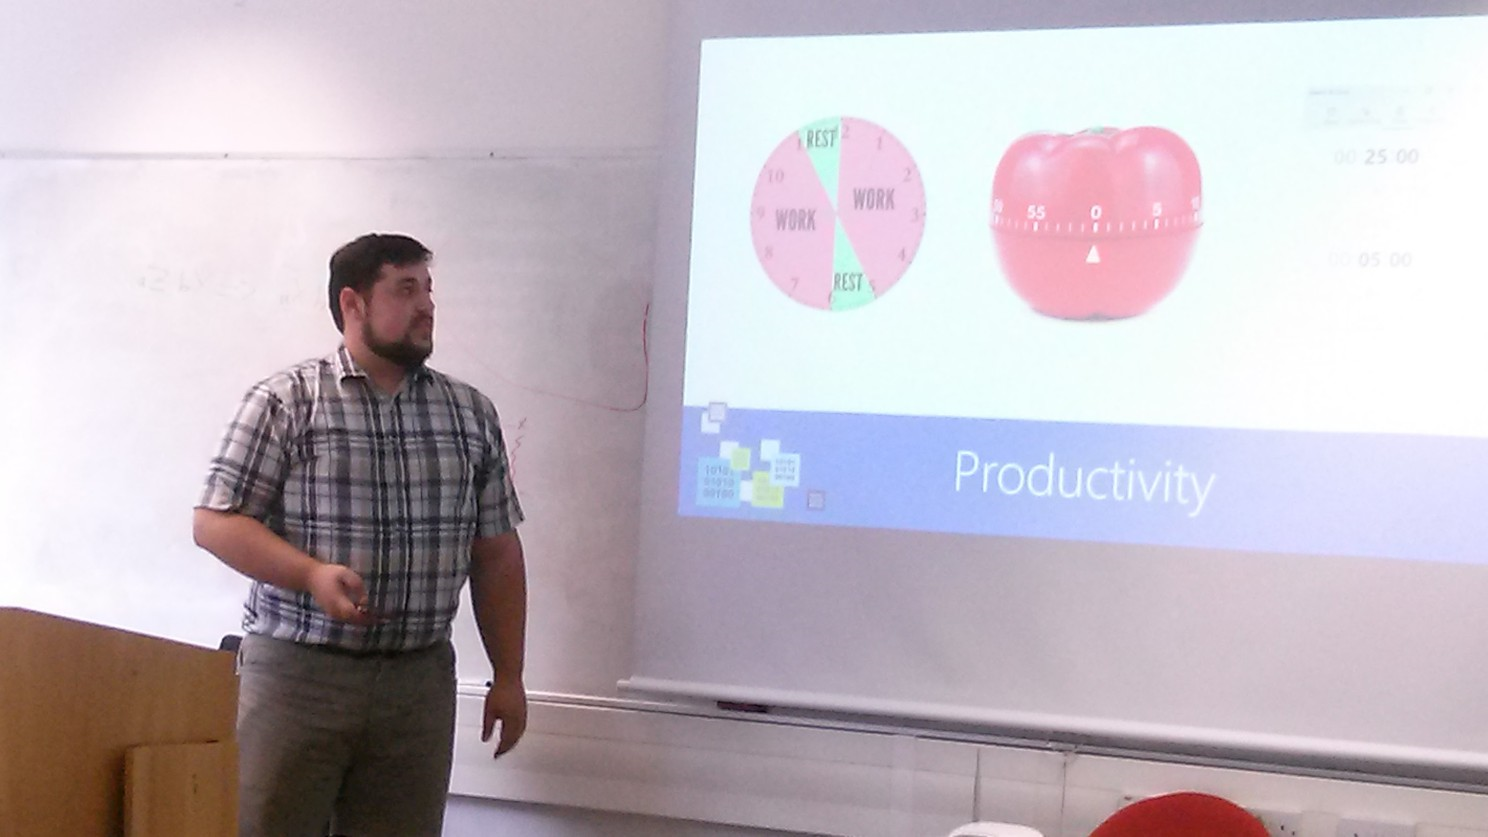 Presenting about Productivity and the Pomodoro technique at University College Dublin